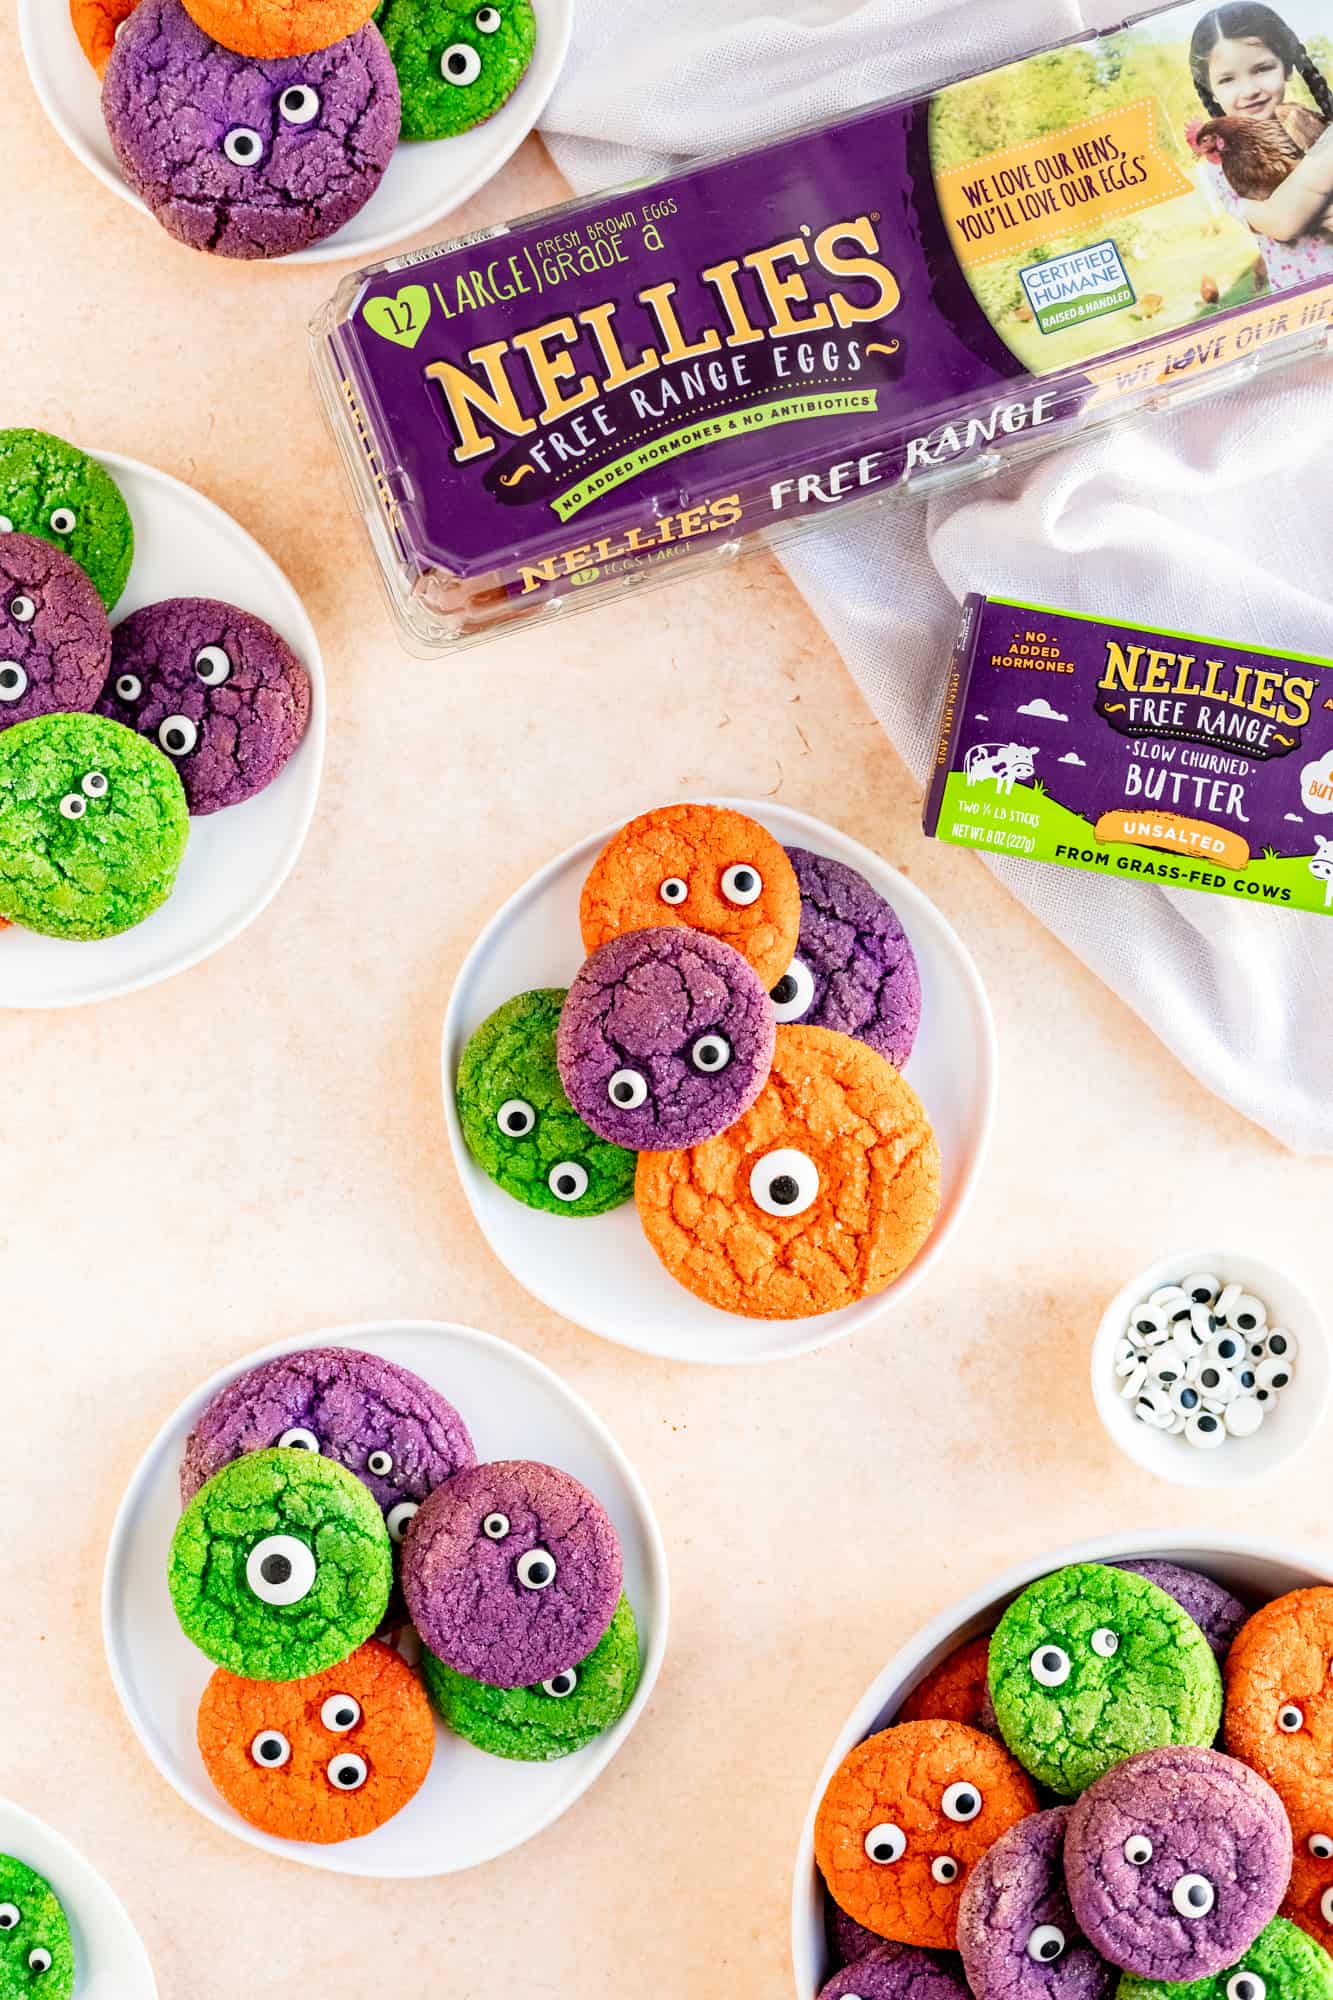 small plates and a bowl of monster sugar cookies with nellie's eggs and butter packaging